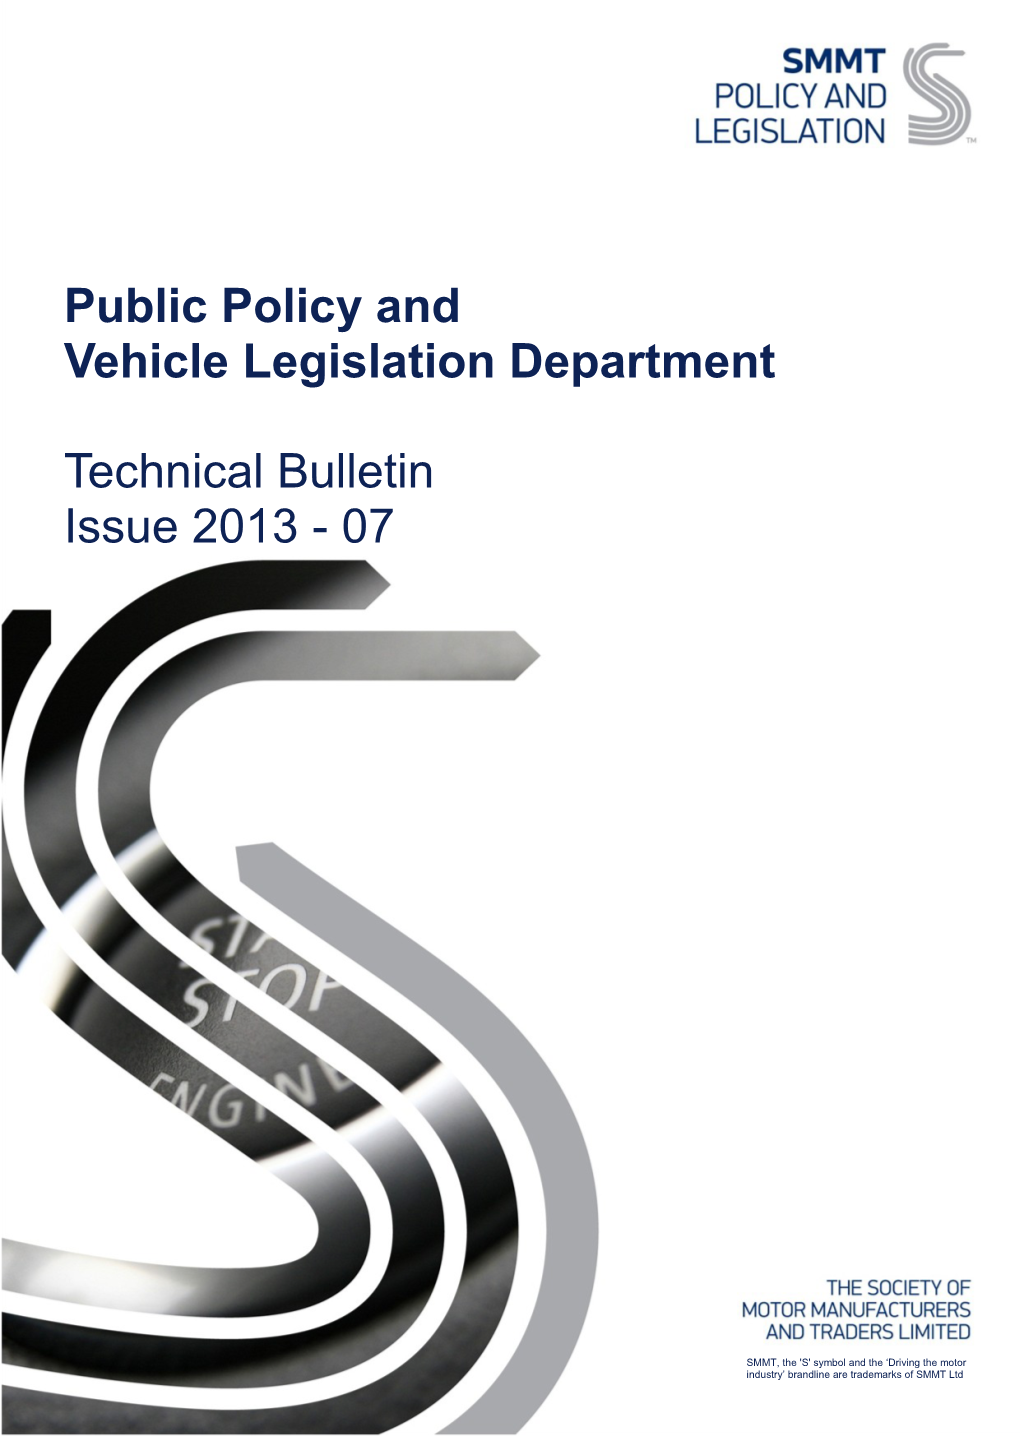 Public Policy and Vehicle Legislation Department Technical Bulletin